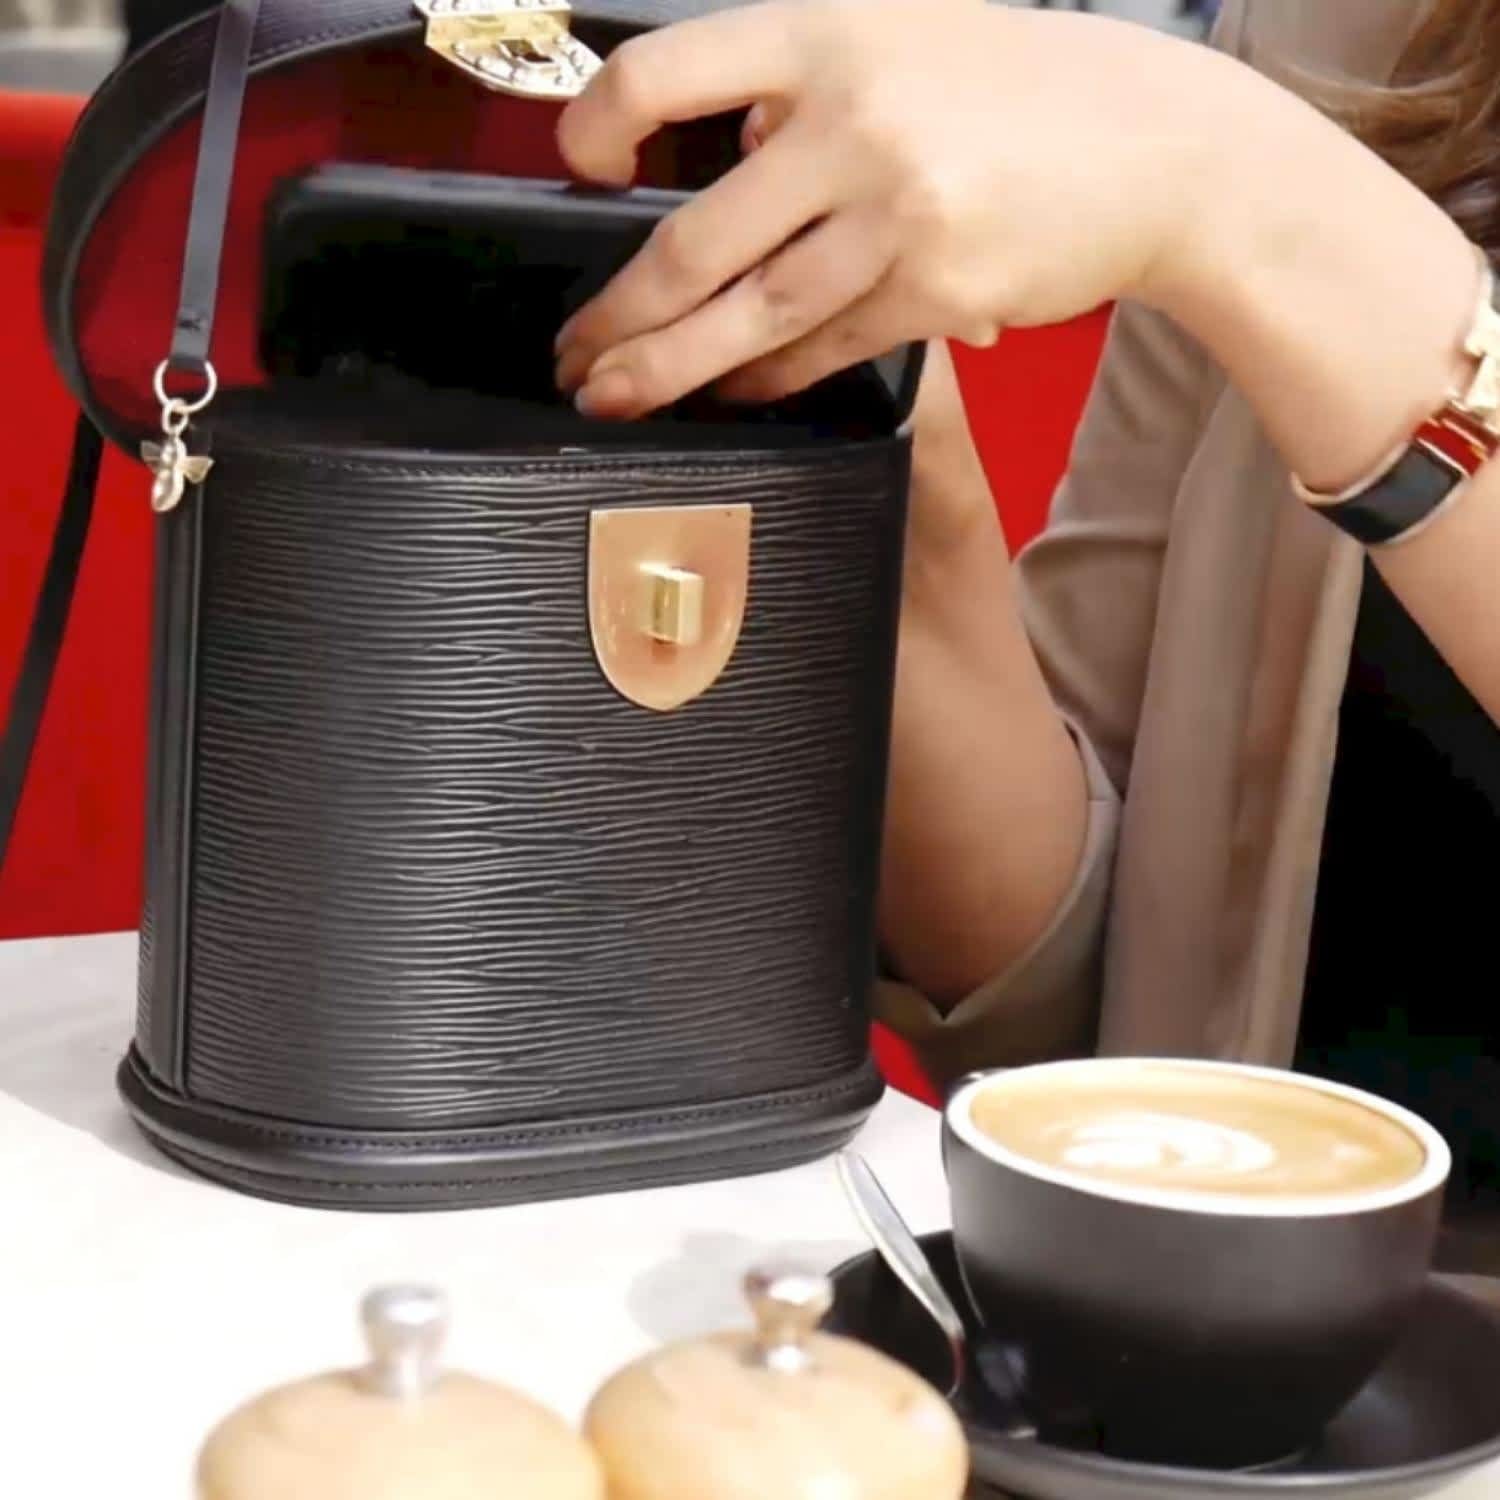 Louis Vuitton Epi Leather Collection - Coffee and Handbags